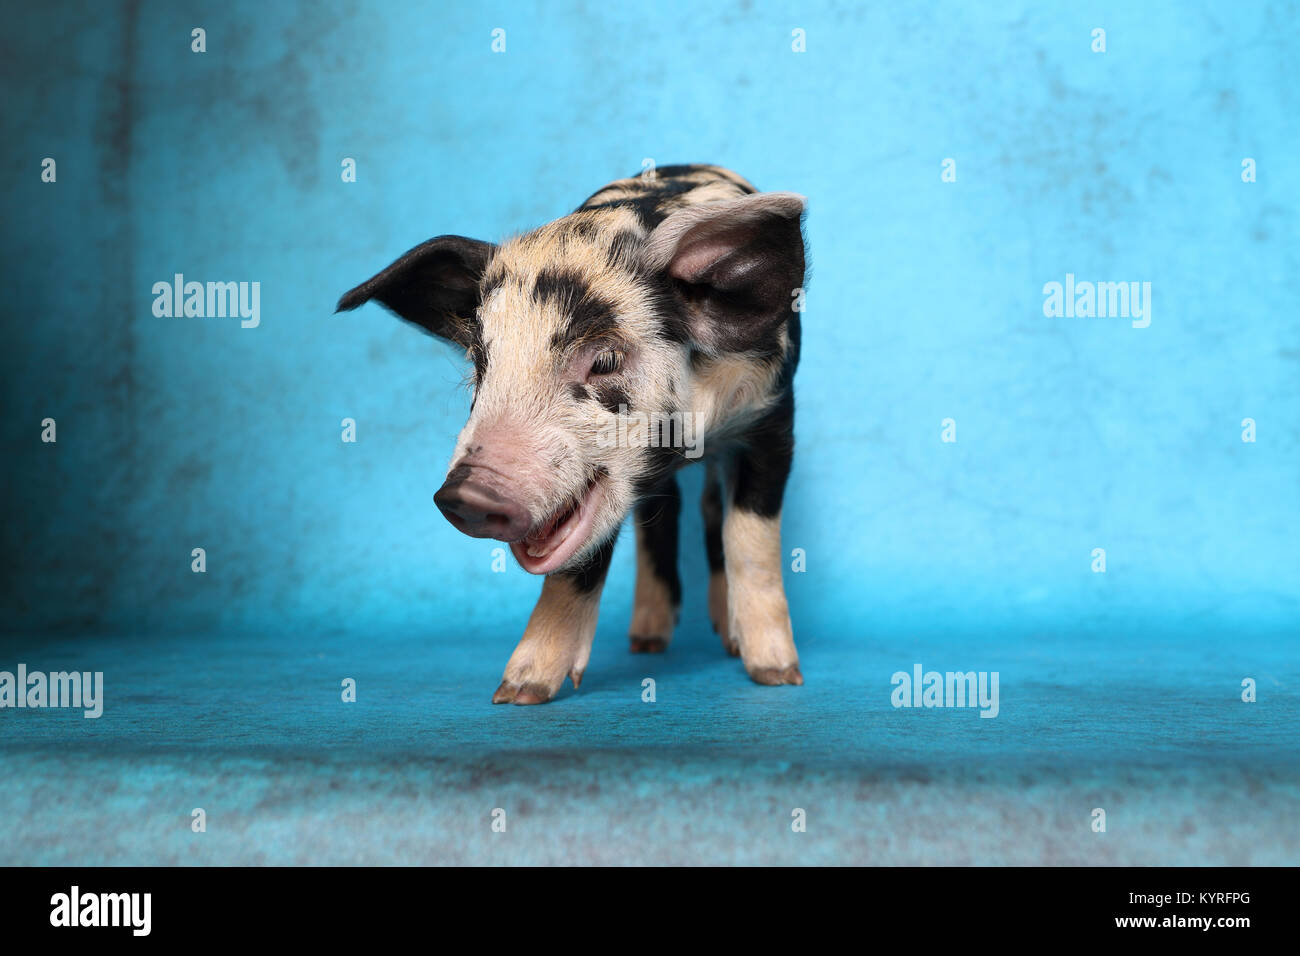 Domestic Pig, Turopolje x ?. Piglet (2 weeks old) standing. Studio picture seen against a blue background. Germany Stock Photo